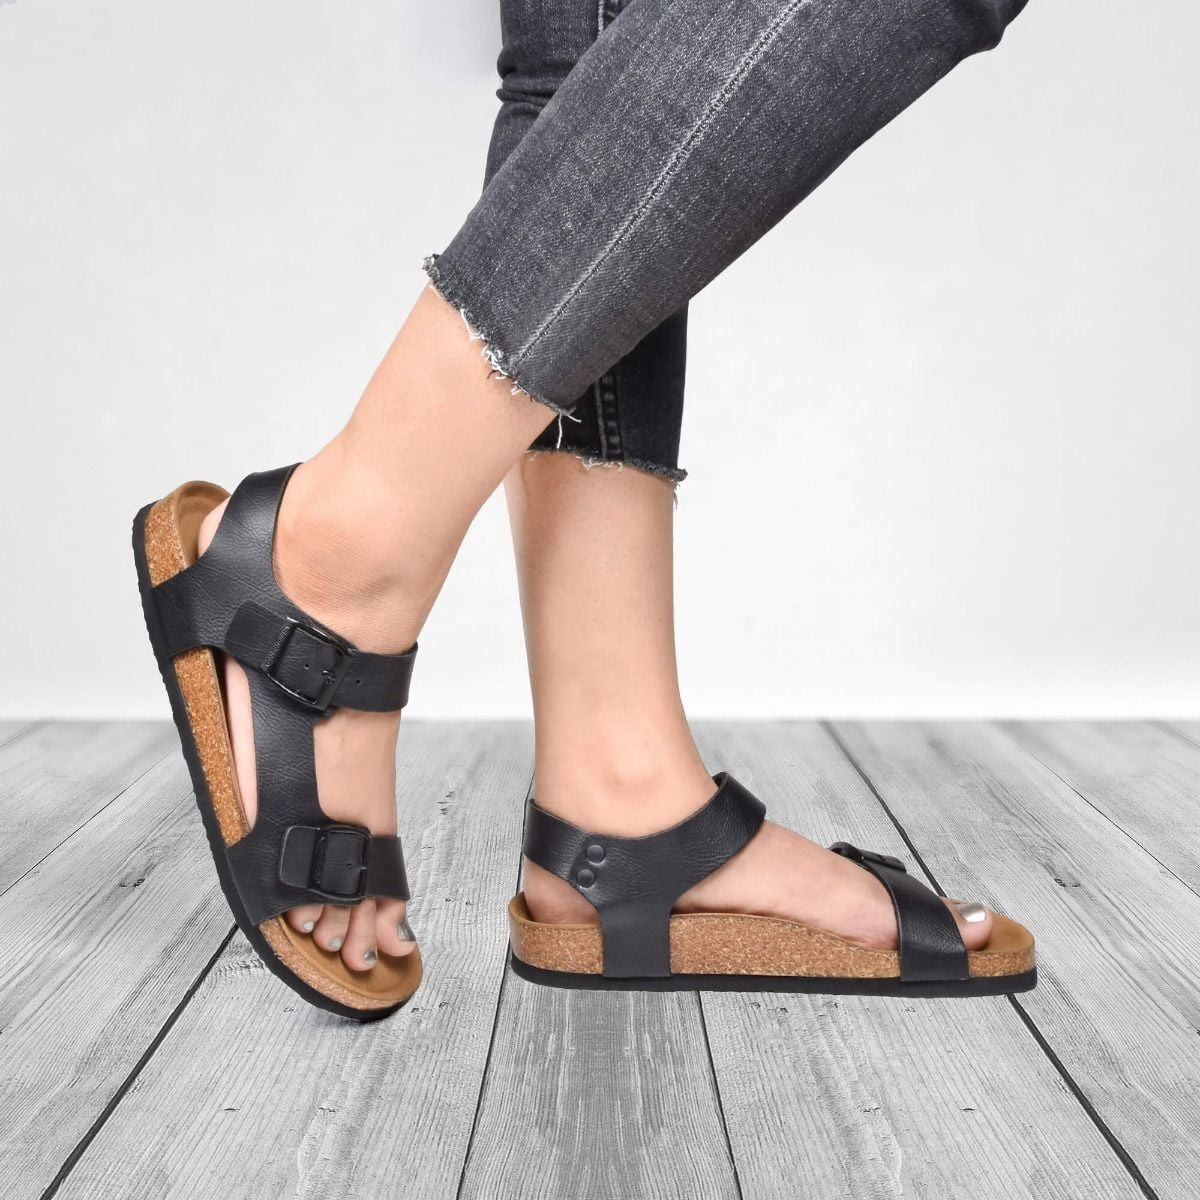 Aerothotic - AEROTHOTIC - Amulet Women's Arch Support Ankle Strap ...